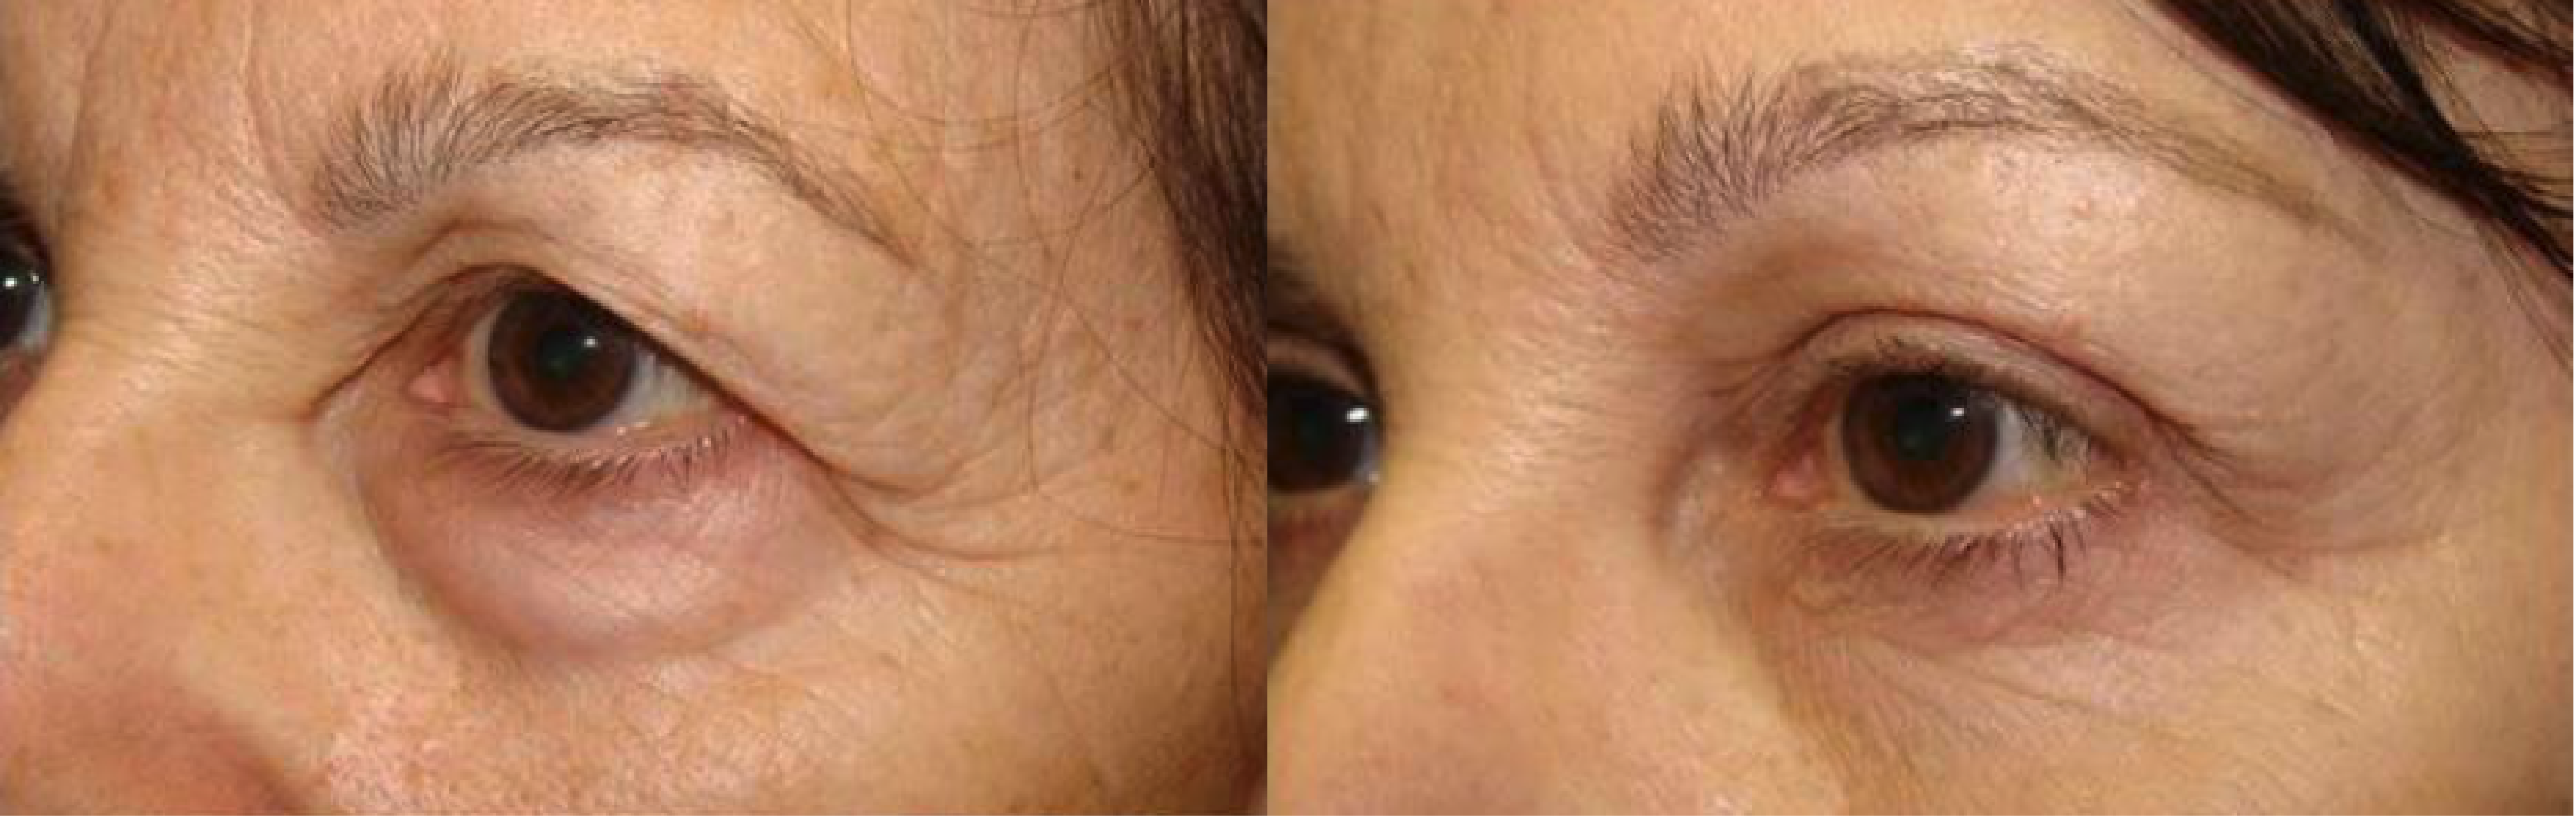 Hollow Upper Eyelids – The Best Way to Fix Them